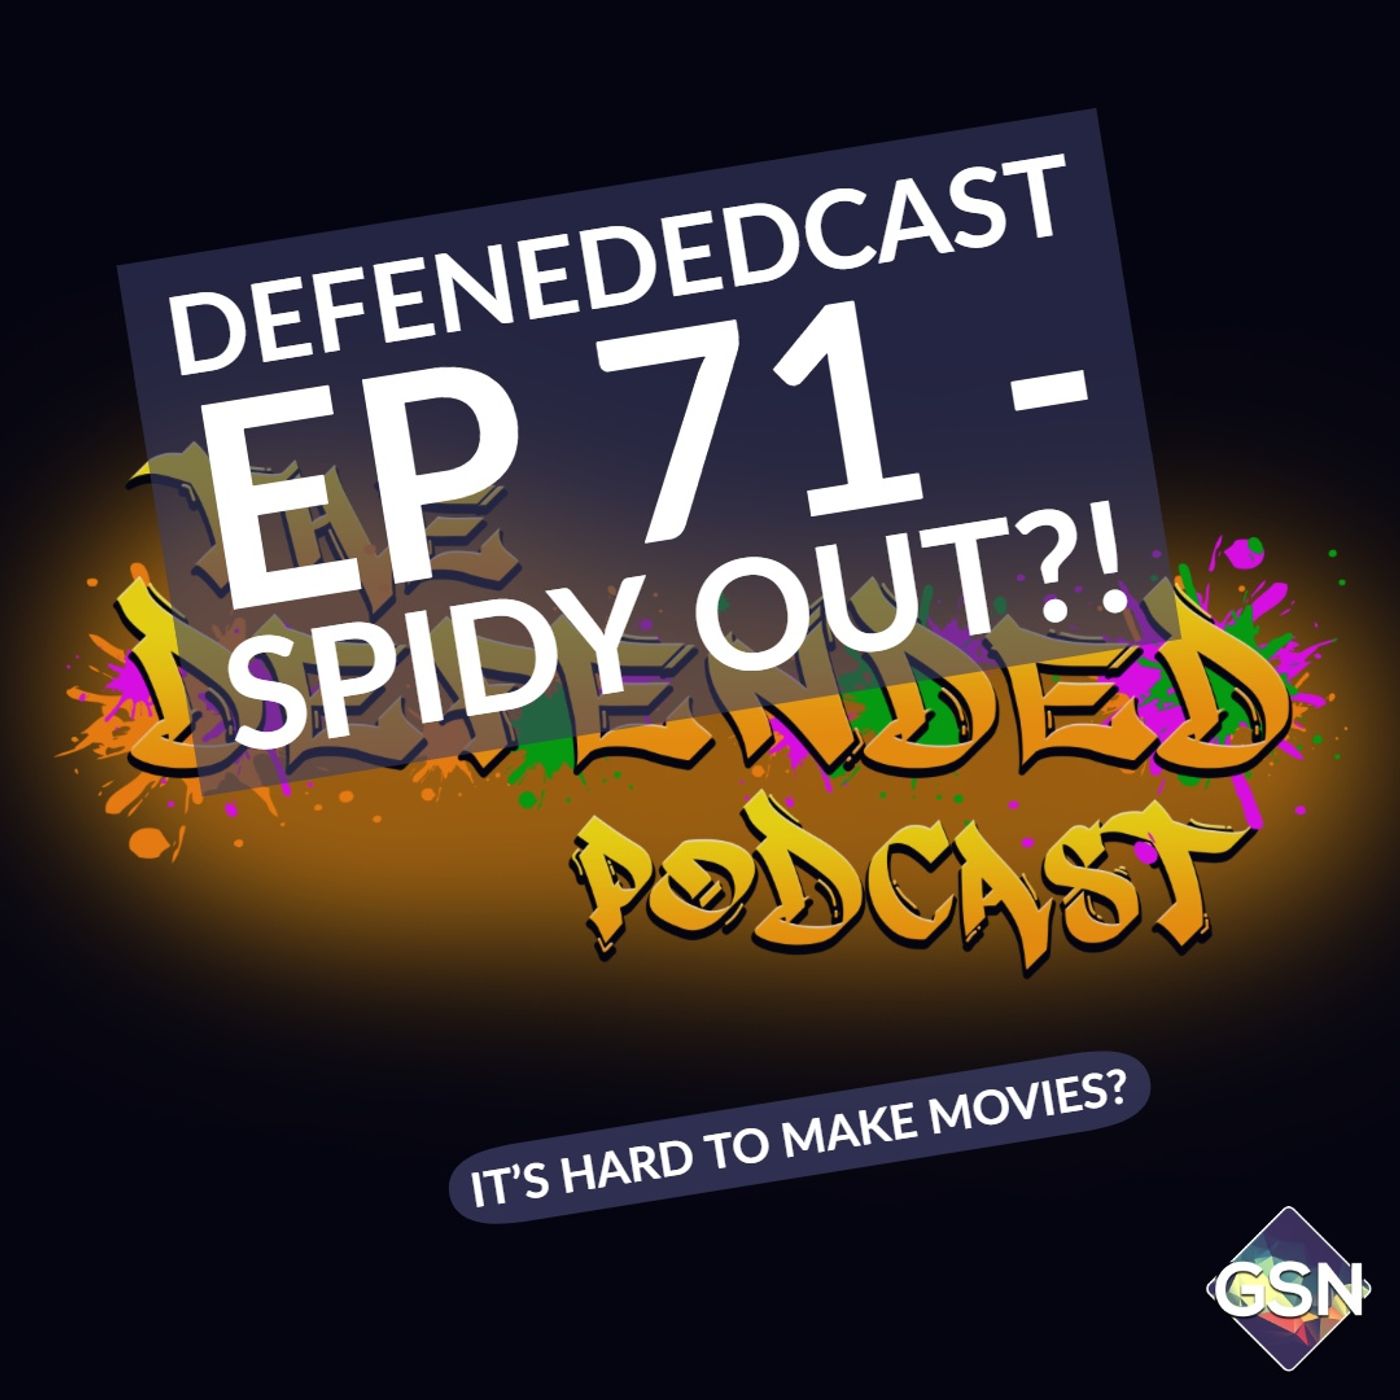 Defenededcast Ep 71 - Spidy Out?!